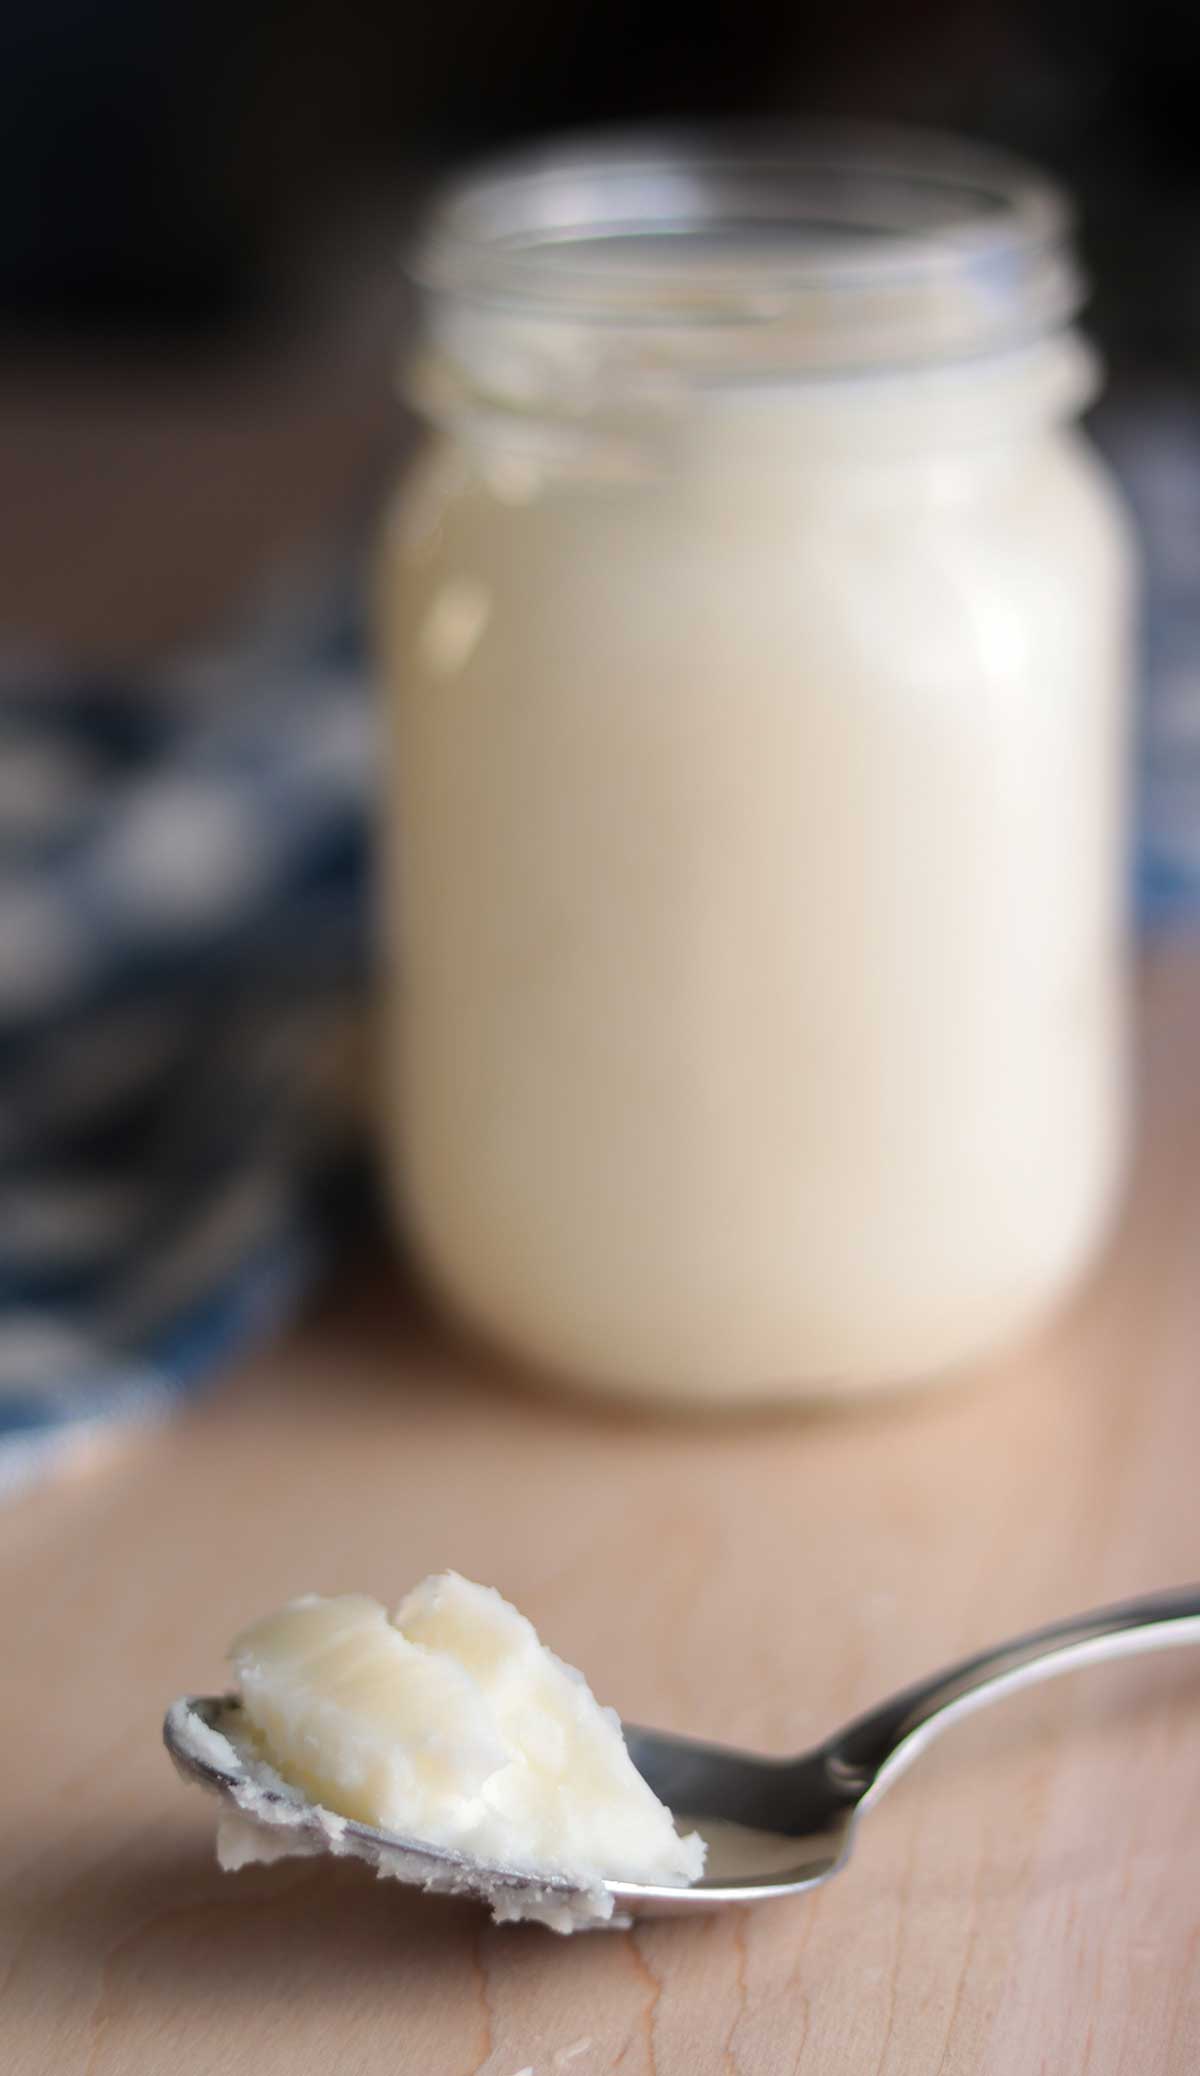 A spoonful of beef tallow in front of a mason jar filled with cream colored beef tallow